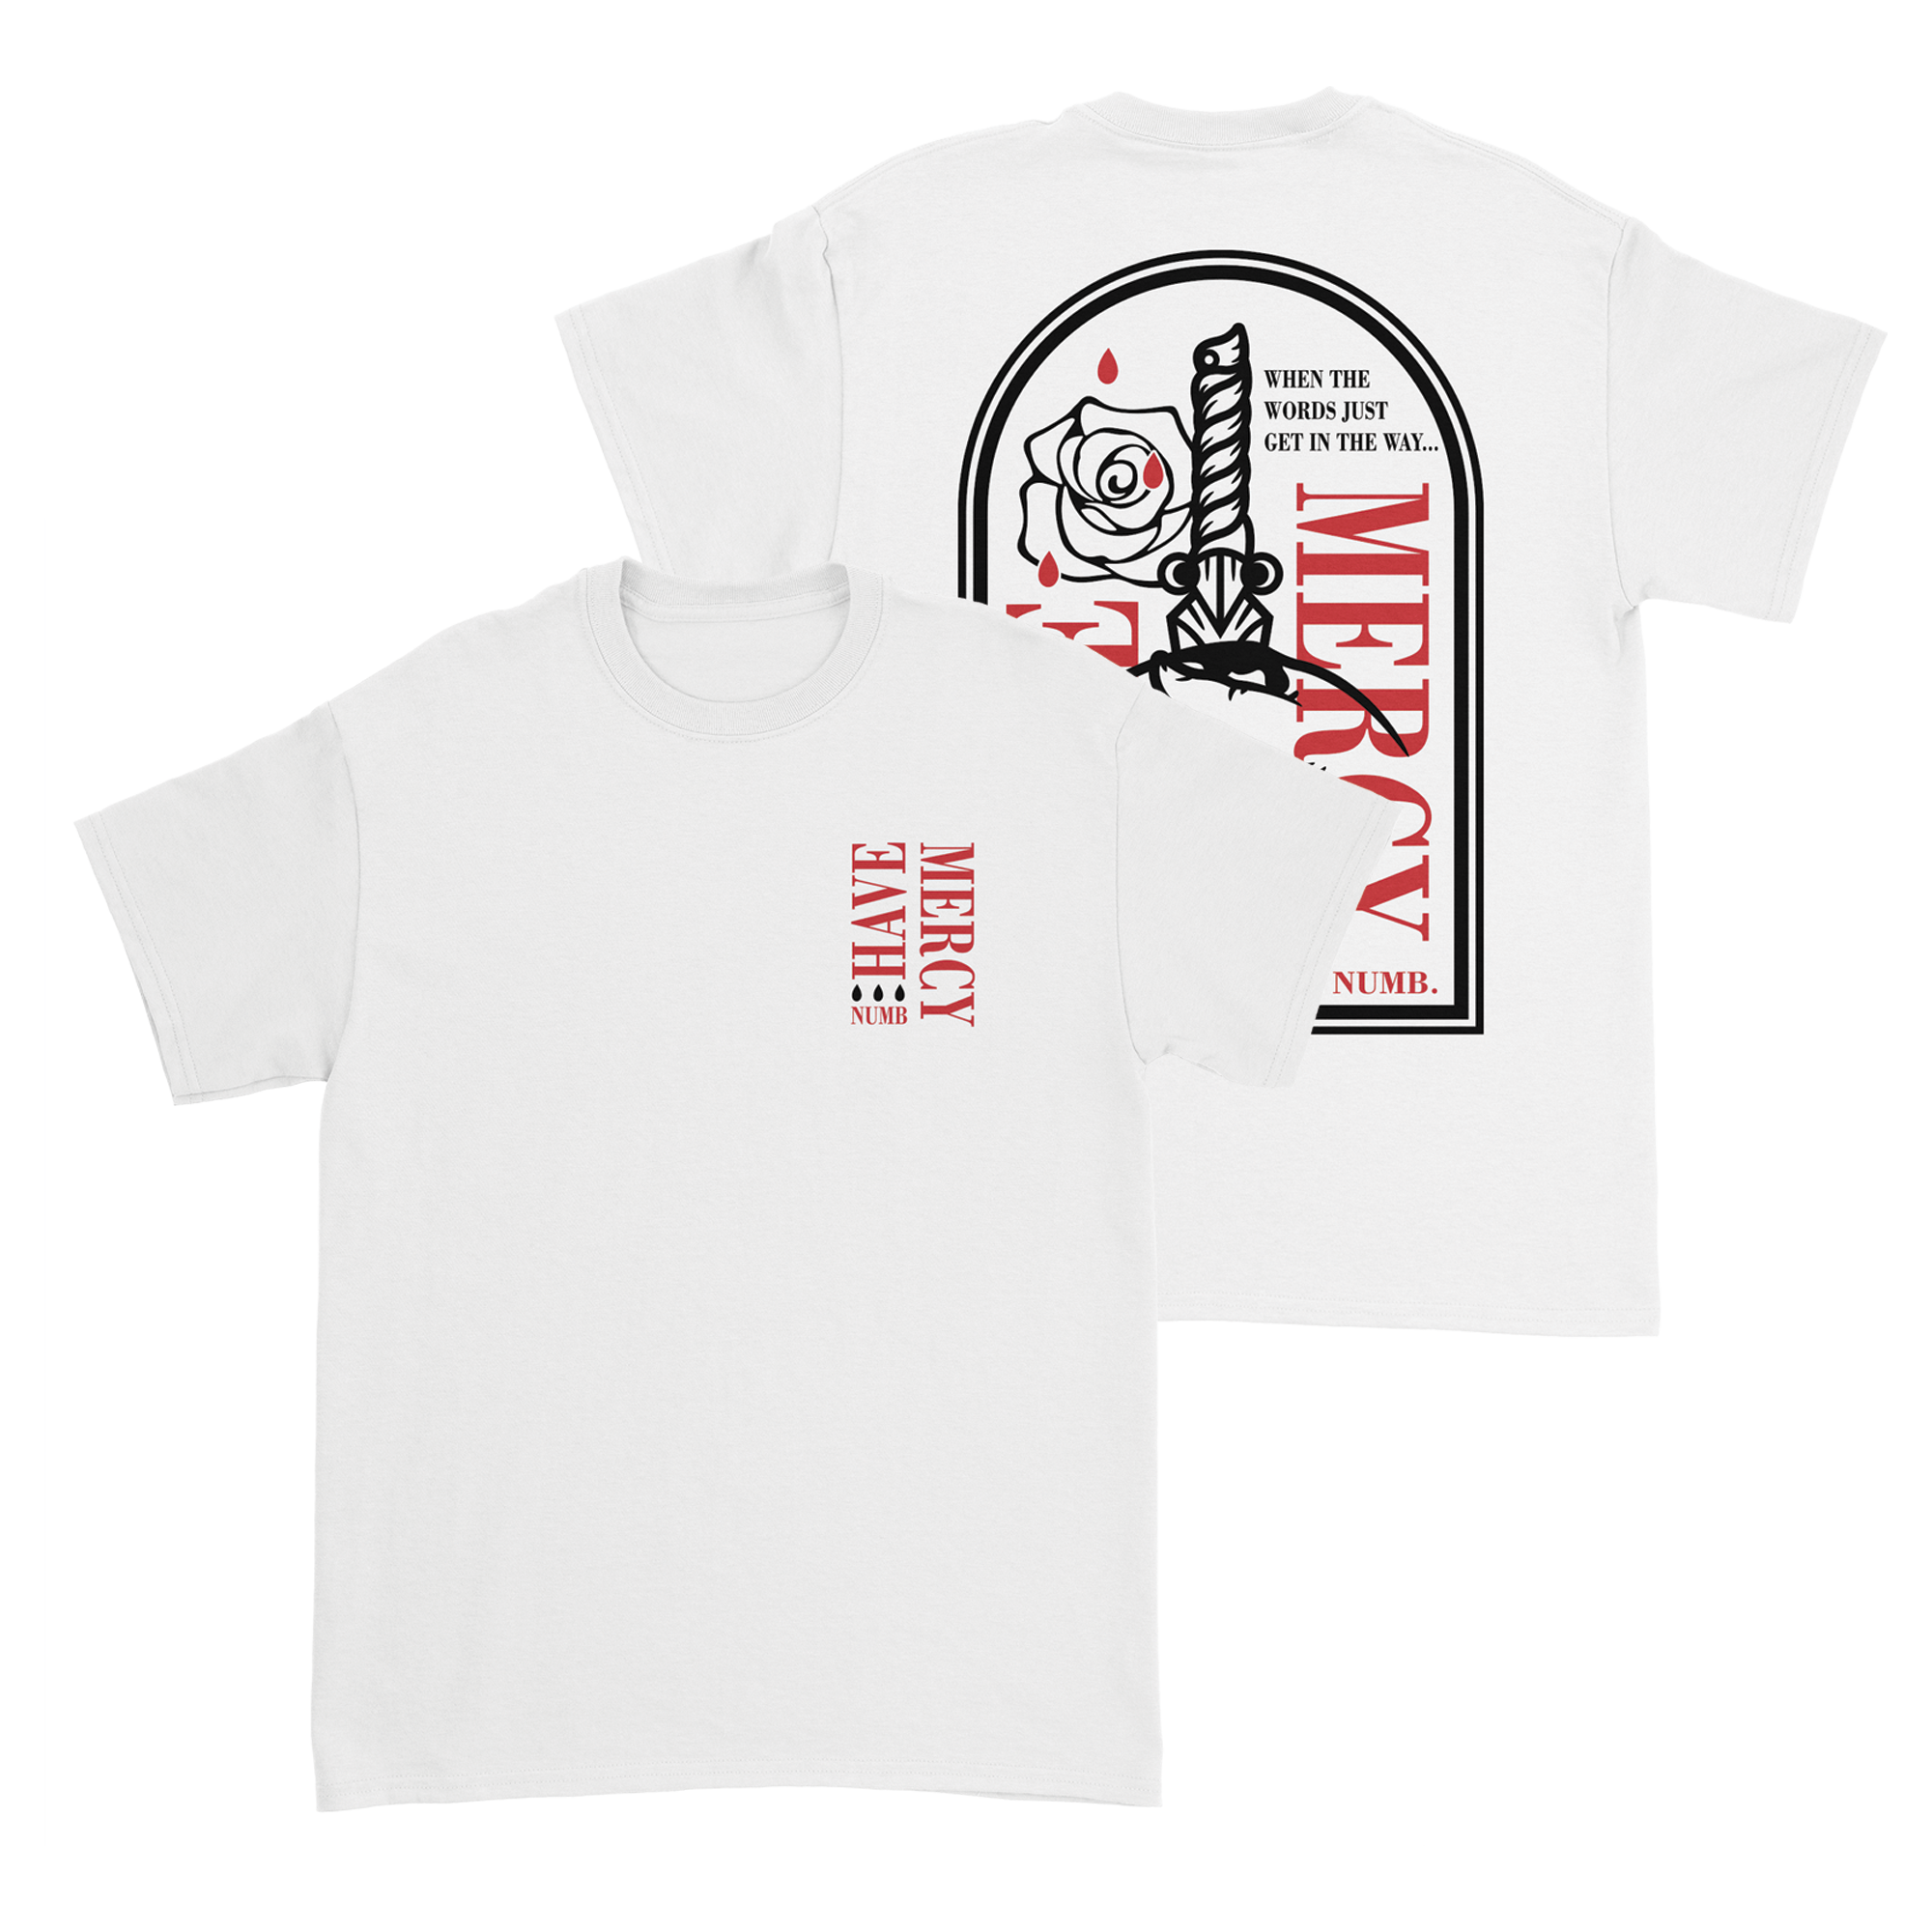 Have Mercy - Knife T-shirt - White (Pre-order)